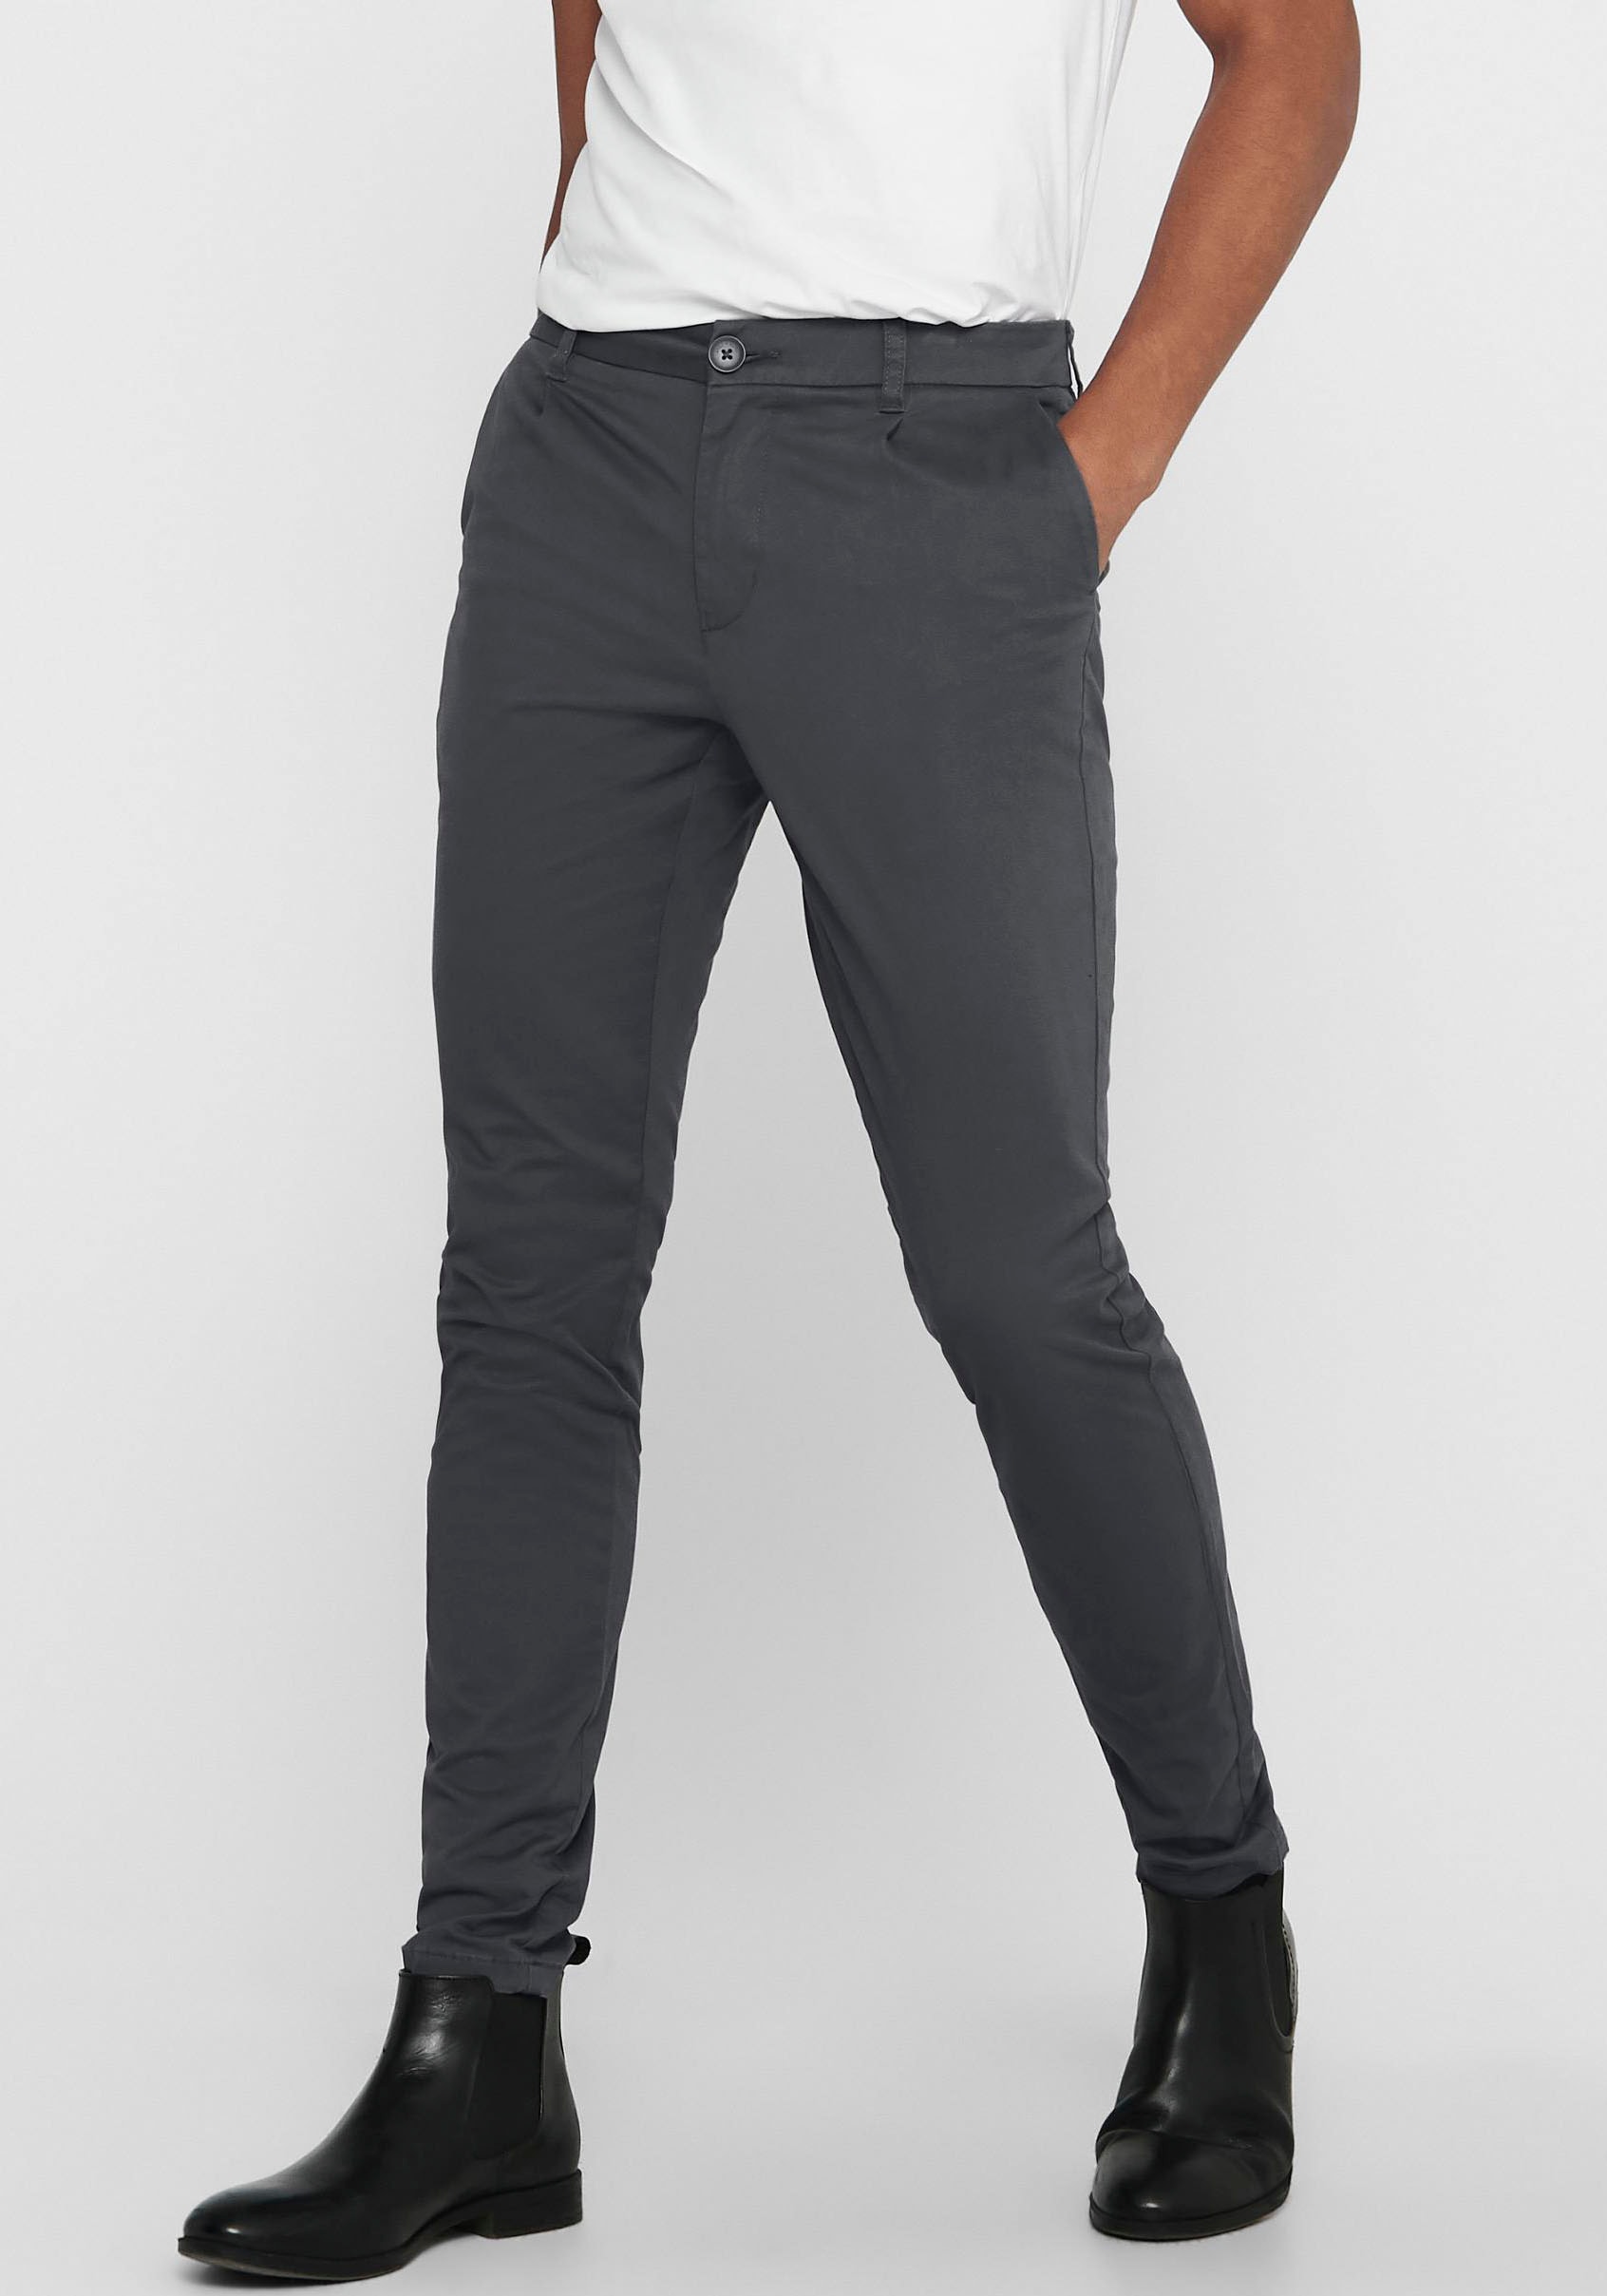 ONLY women's black trousers